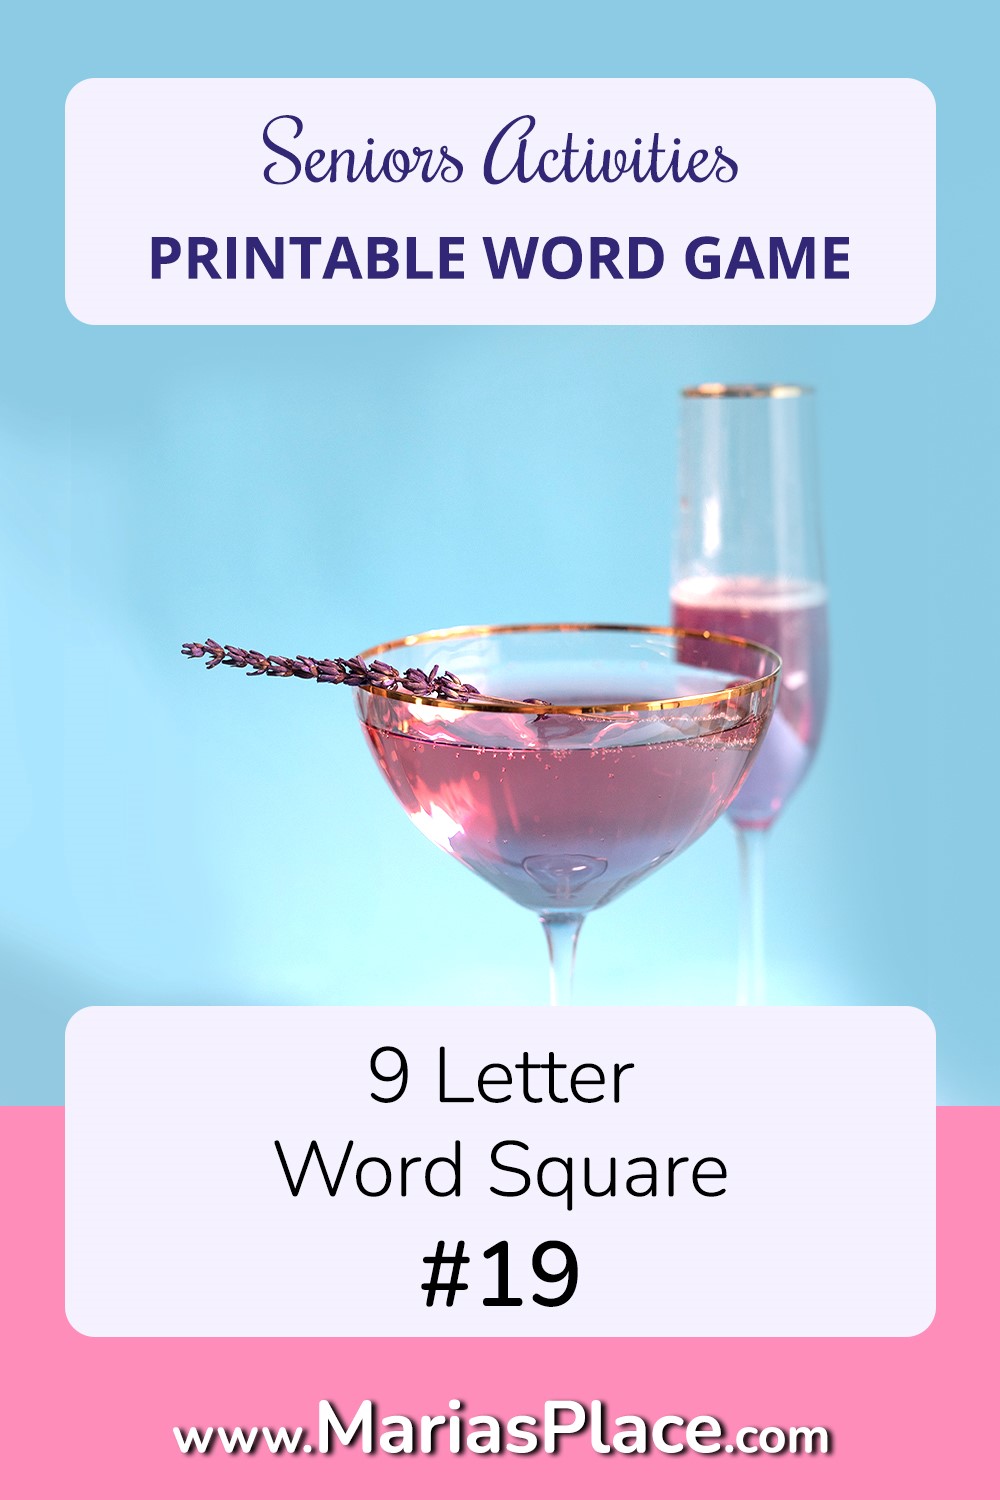 9 Letter Word Square, #19